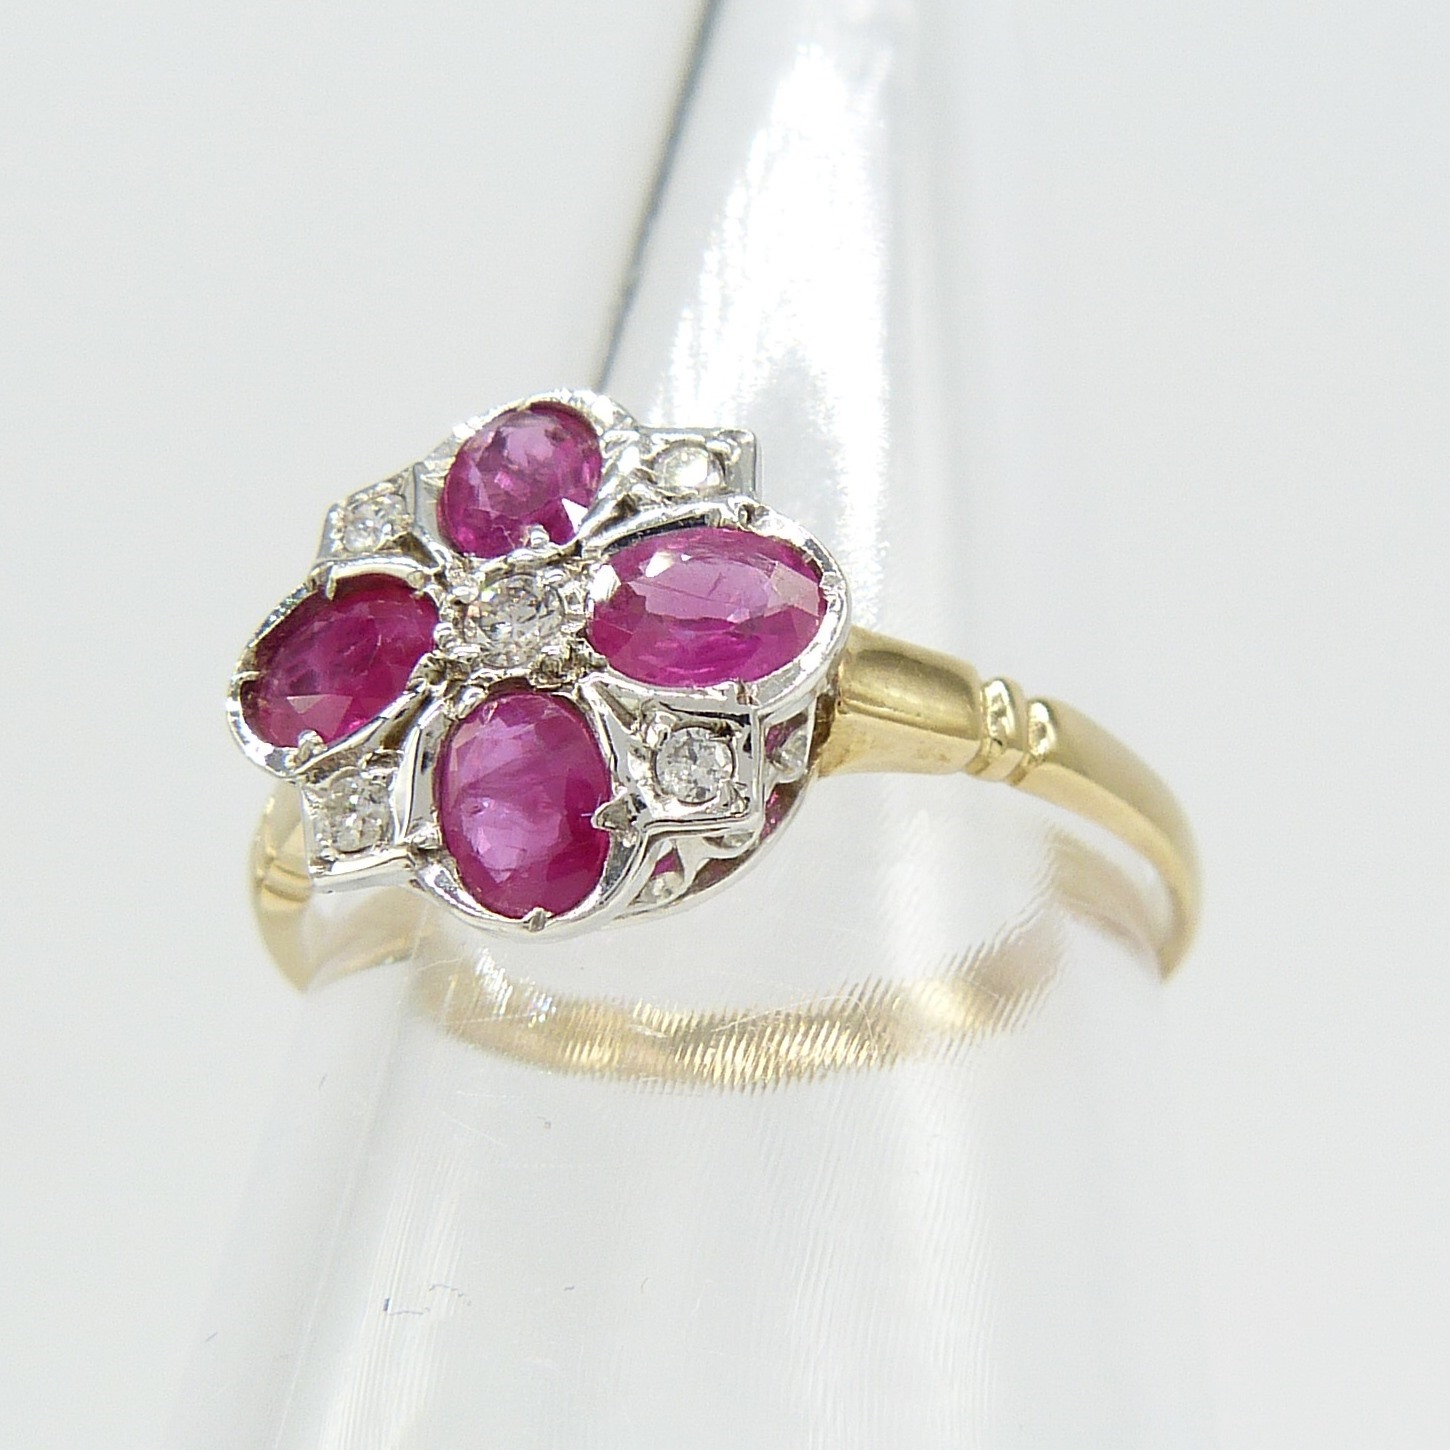 Yellow and White Gold Vintage-Style Ring Set With Rubies and Diamonds - Image 2 of 6